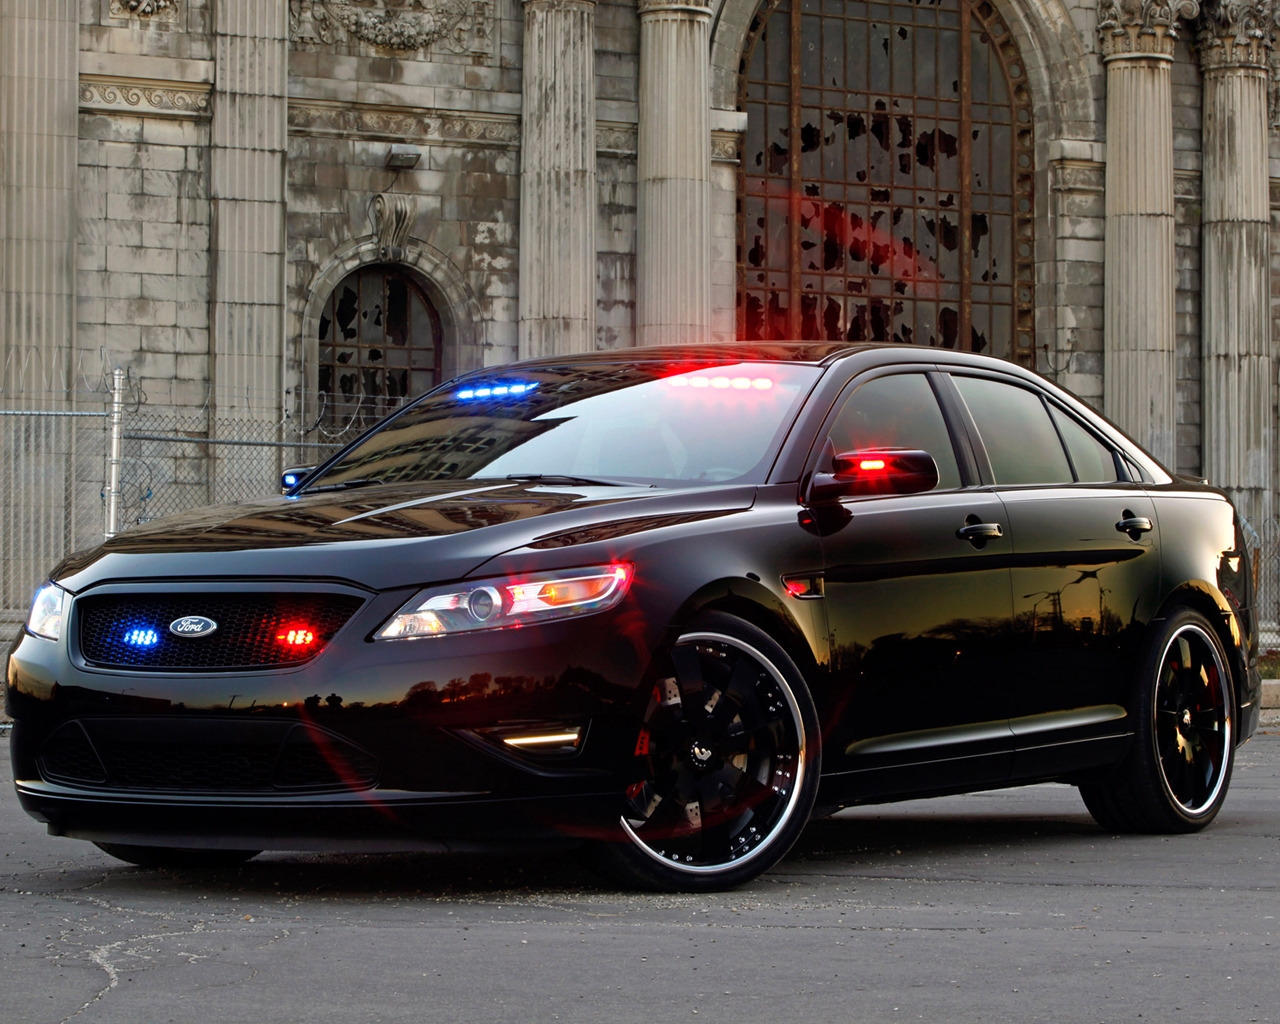 Ford Stealth Police Interceptor for 1280 x 1024 resolution